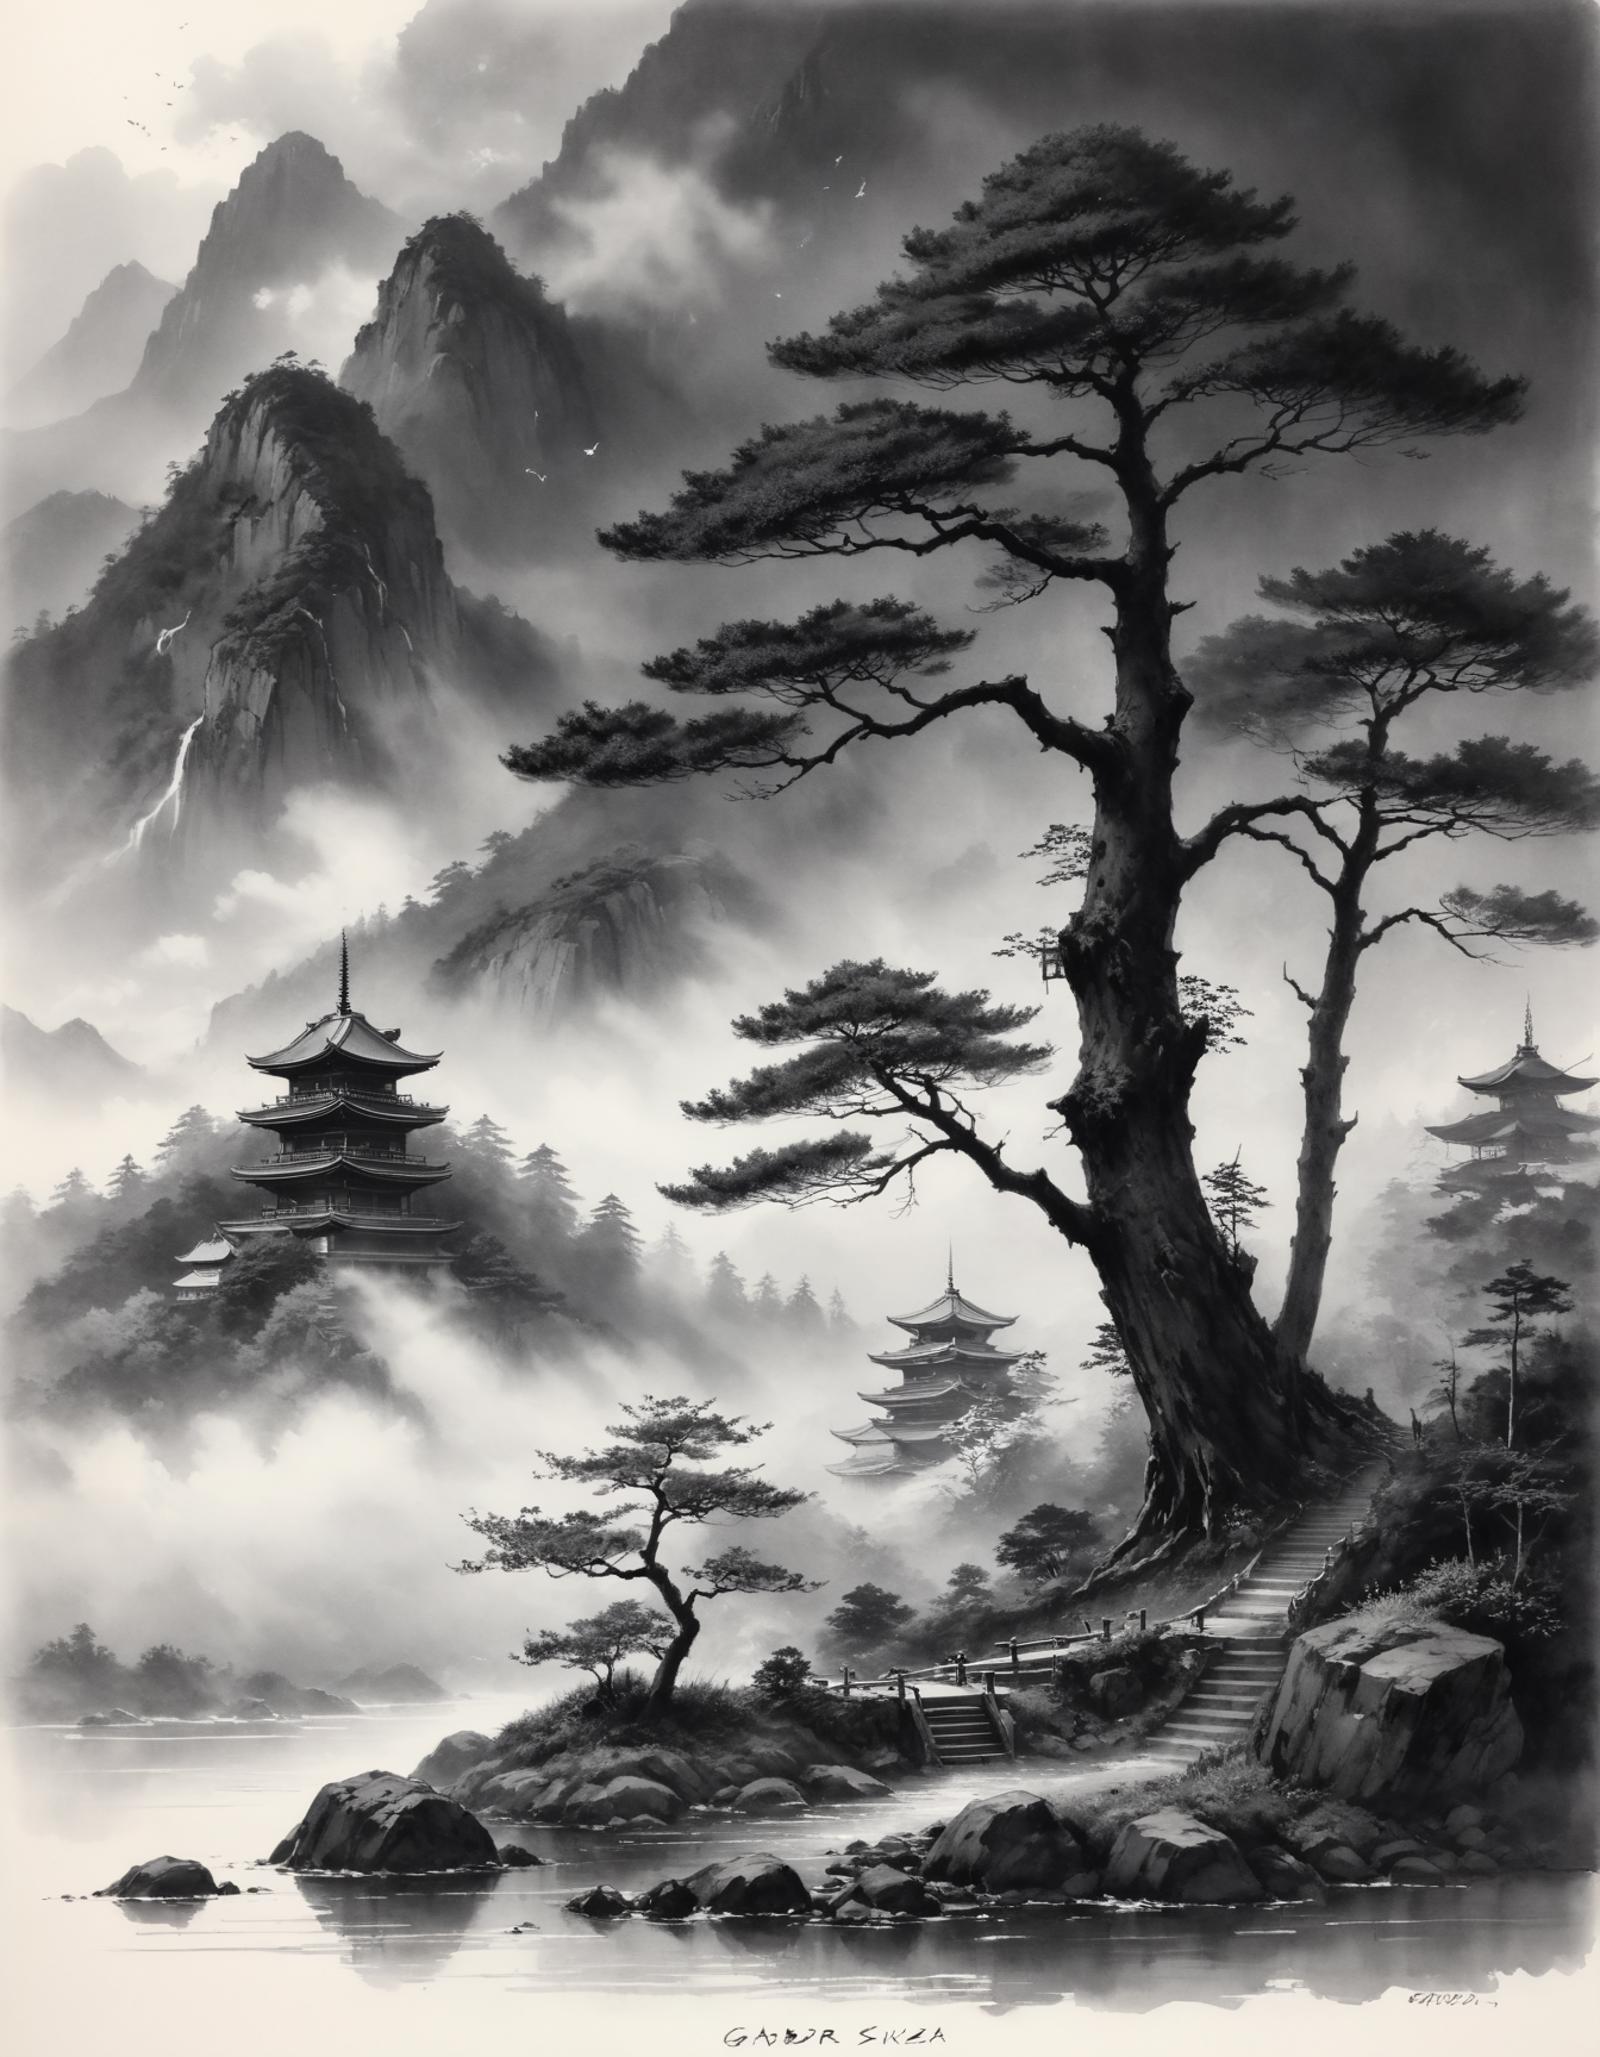 An Asian mountain scene with rocky steps and a tree.